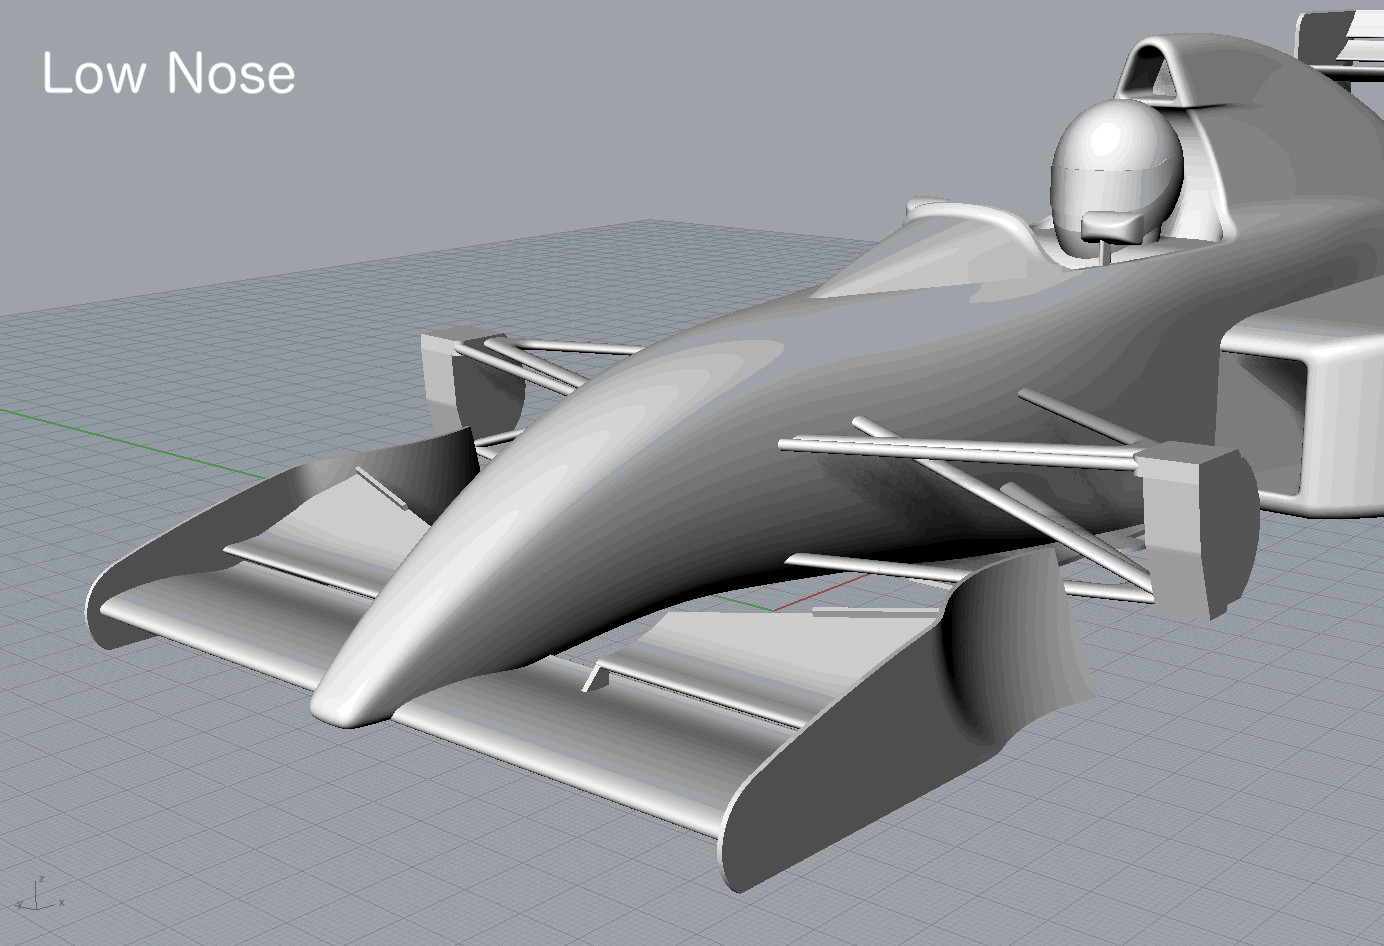 1990s-f1s_fr-wing_nose-monocoque_animated